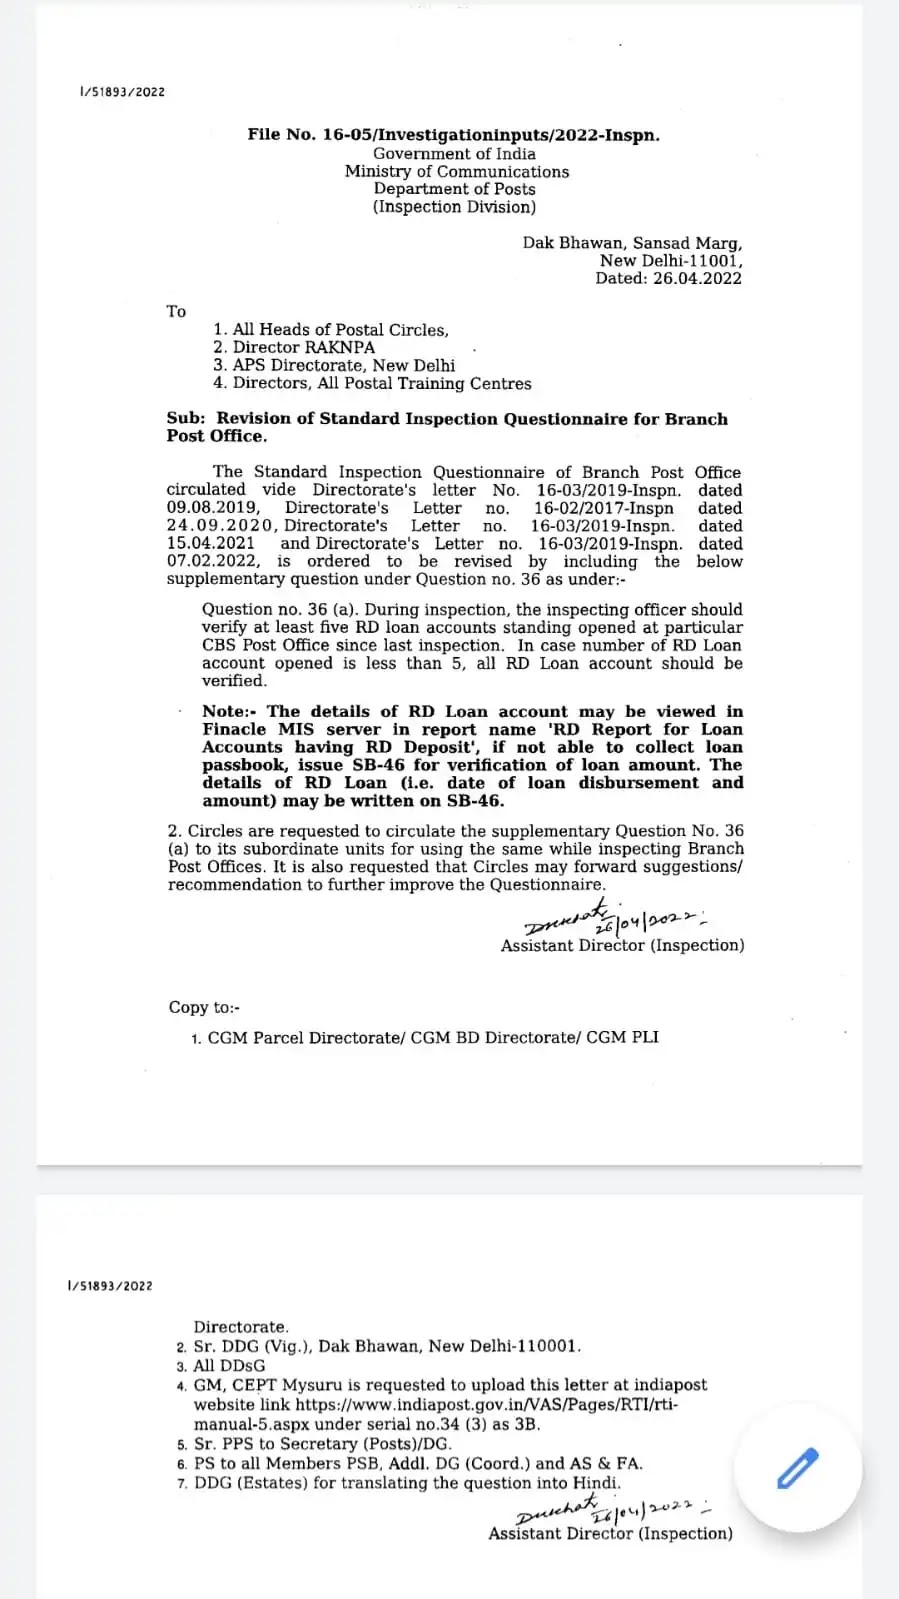 Revised BO Inspection Questionnaire | Revision of Standard Inspection Questionnaire for Branch Post Office (BO) | Dated 26.04.2022